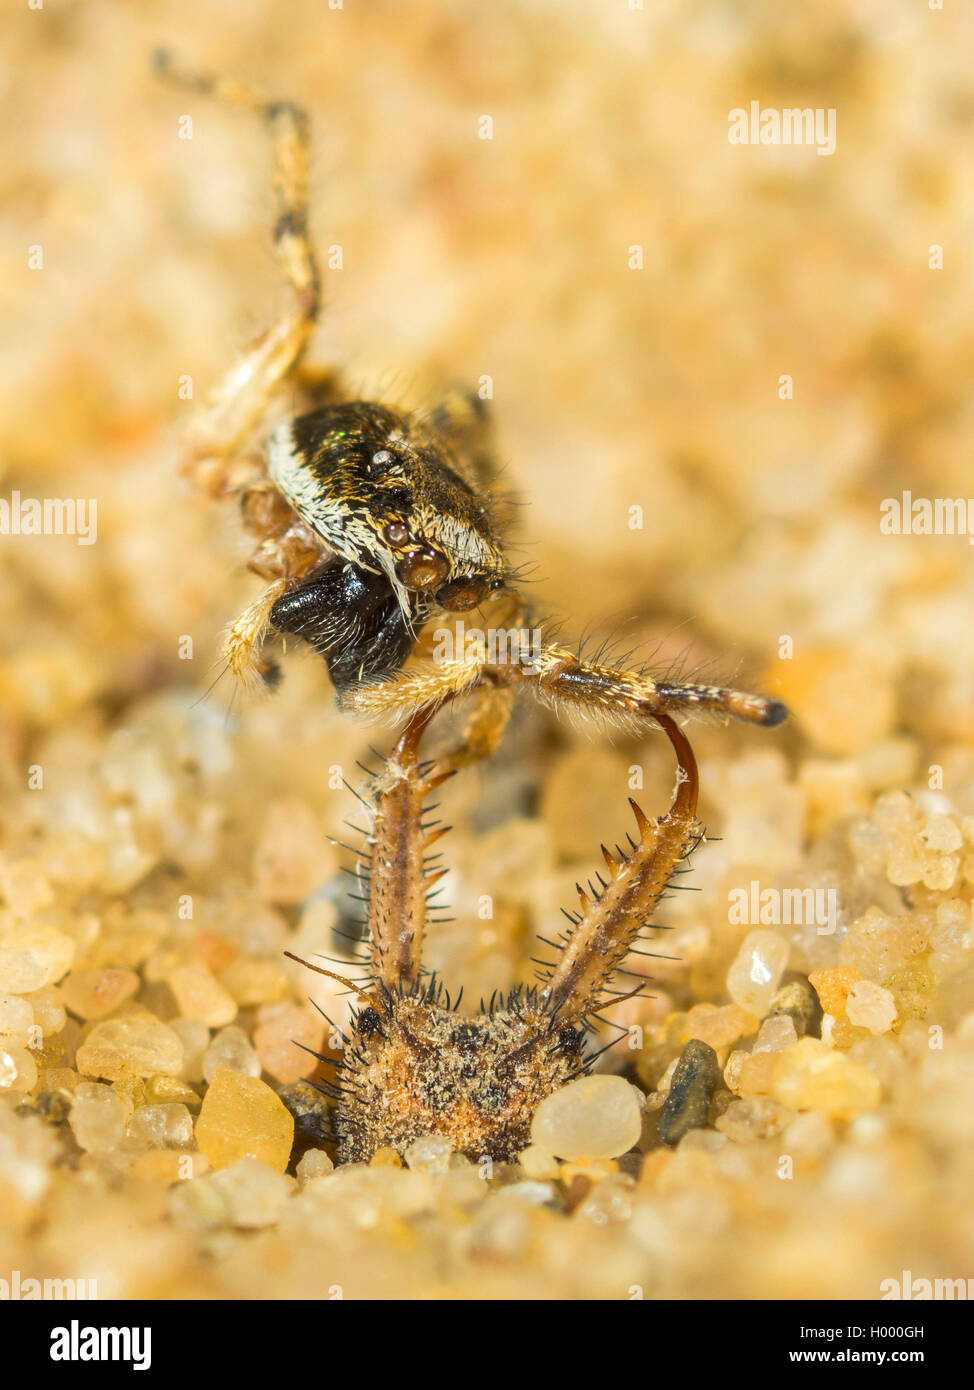 European antlion (Euroleon nostras), Mature Antlion sucking a captured Zebra Spider (Salticus scenicus) at the ground of the conical pit, Germany Stock Photo